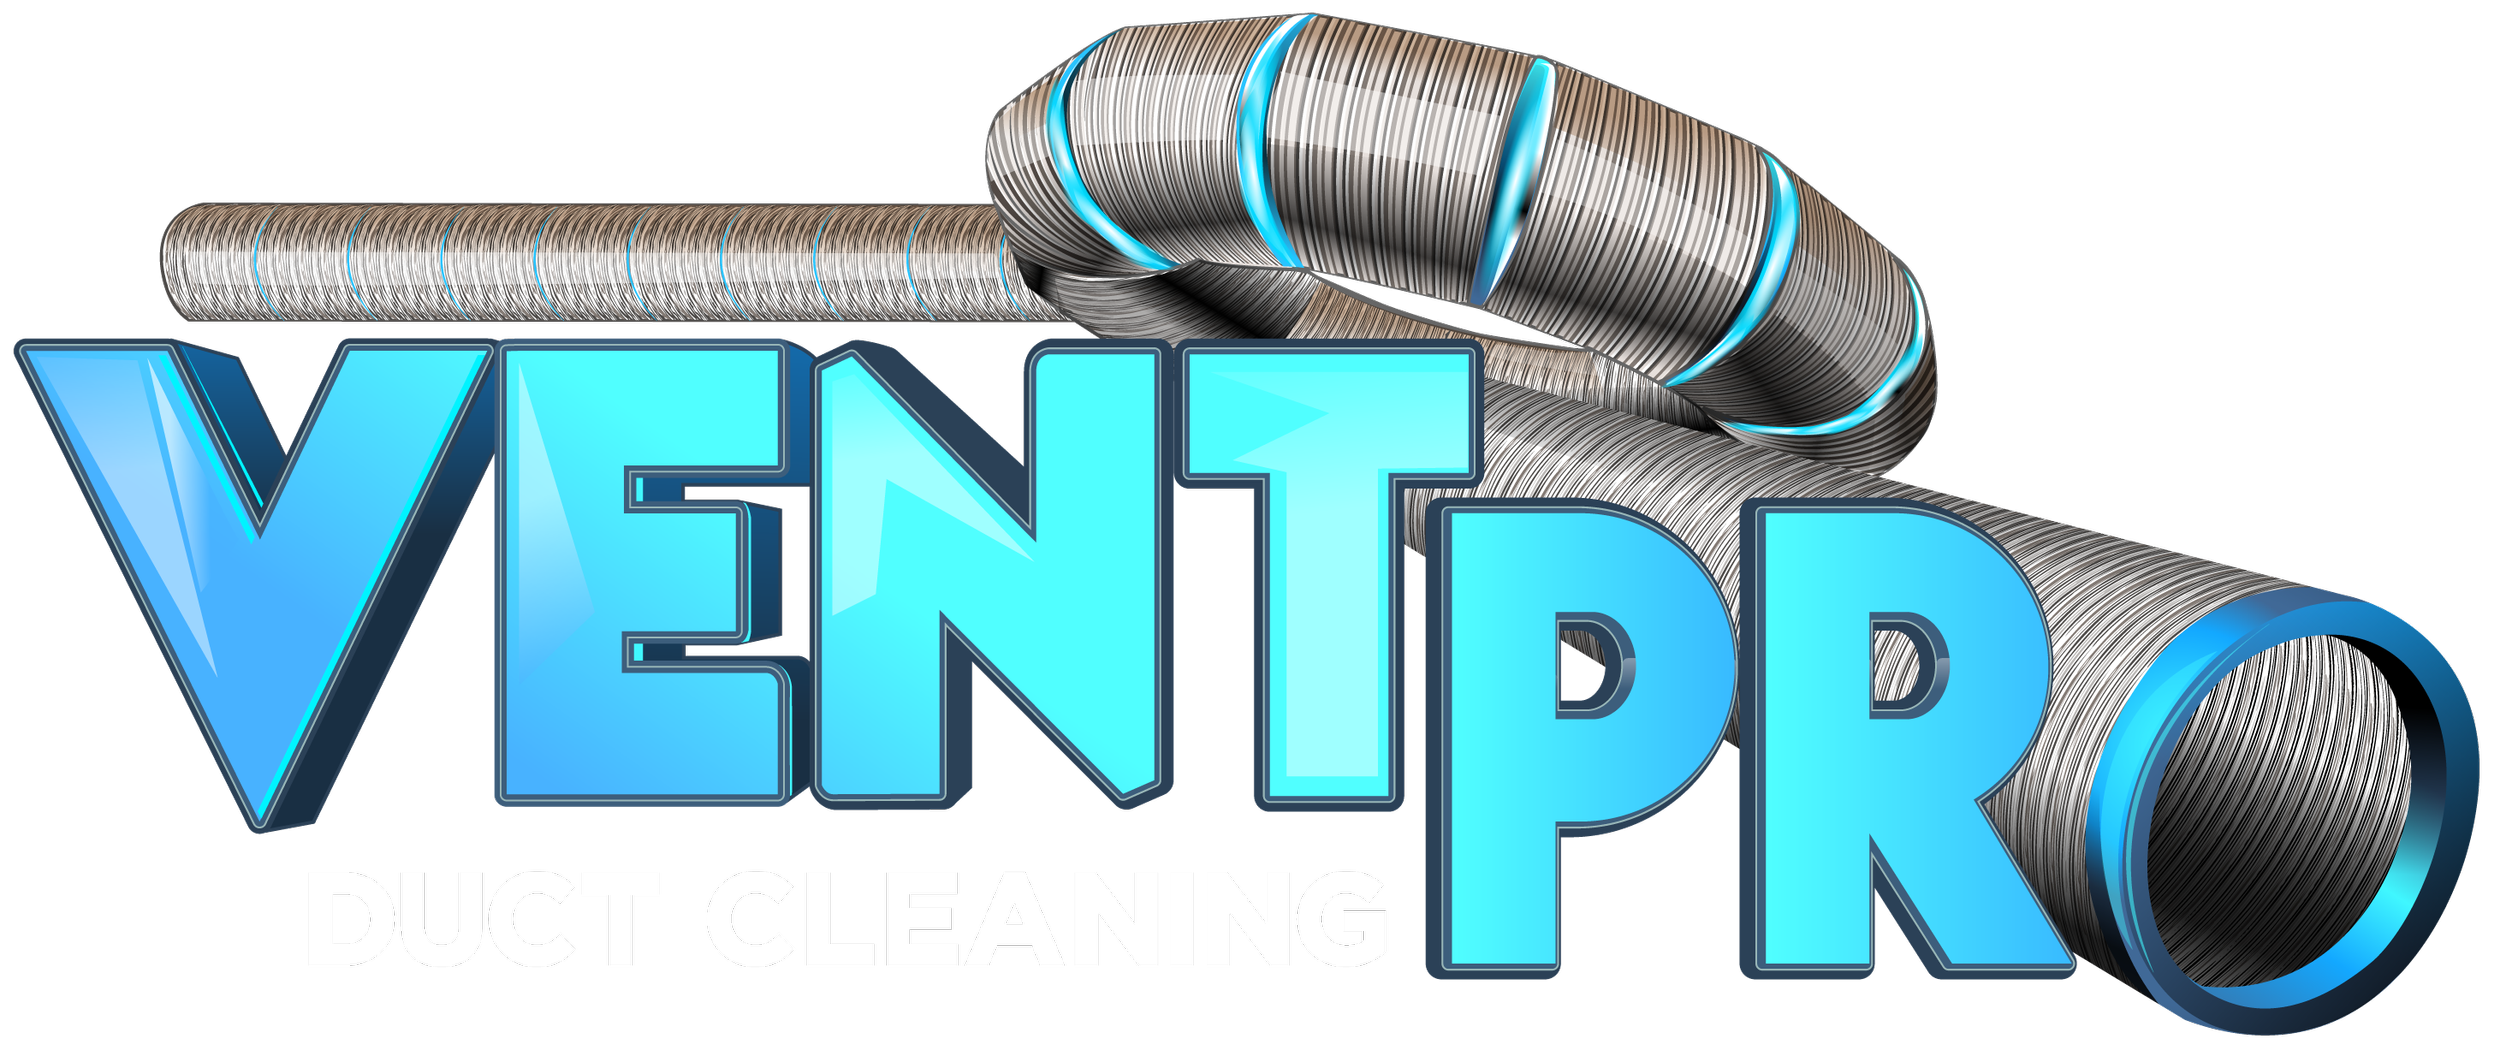 VentPro Duct Cleaning and Dryer Vent Cleaning